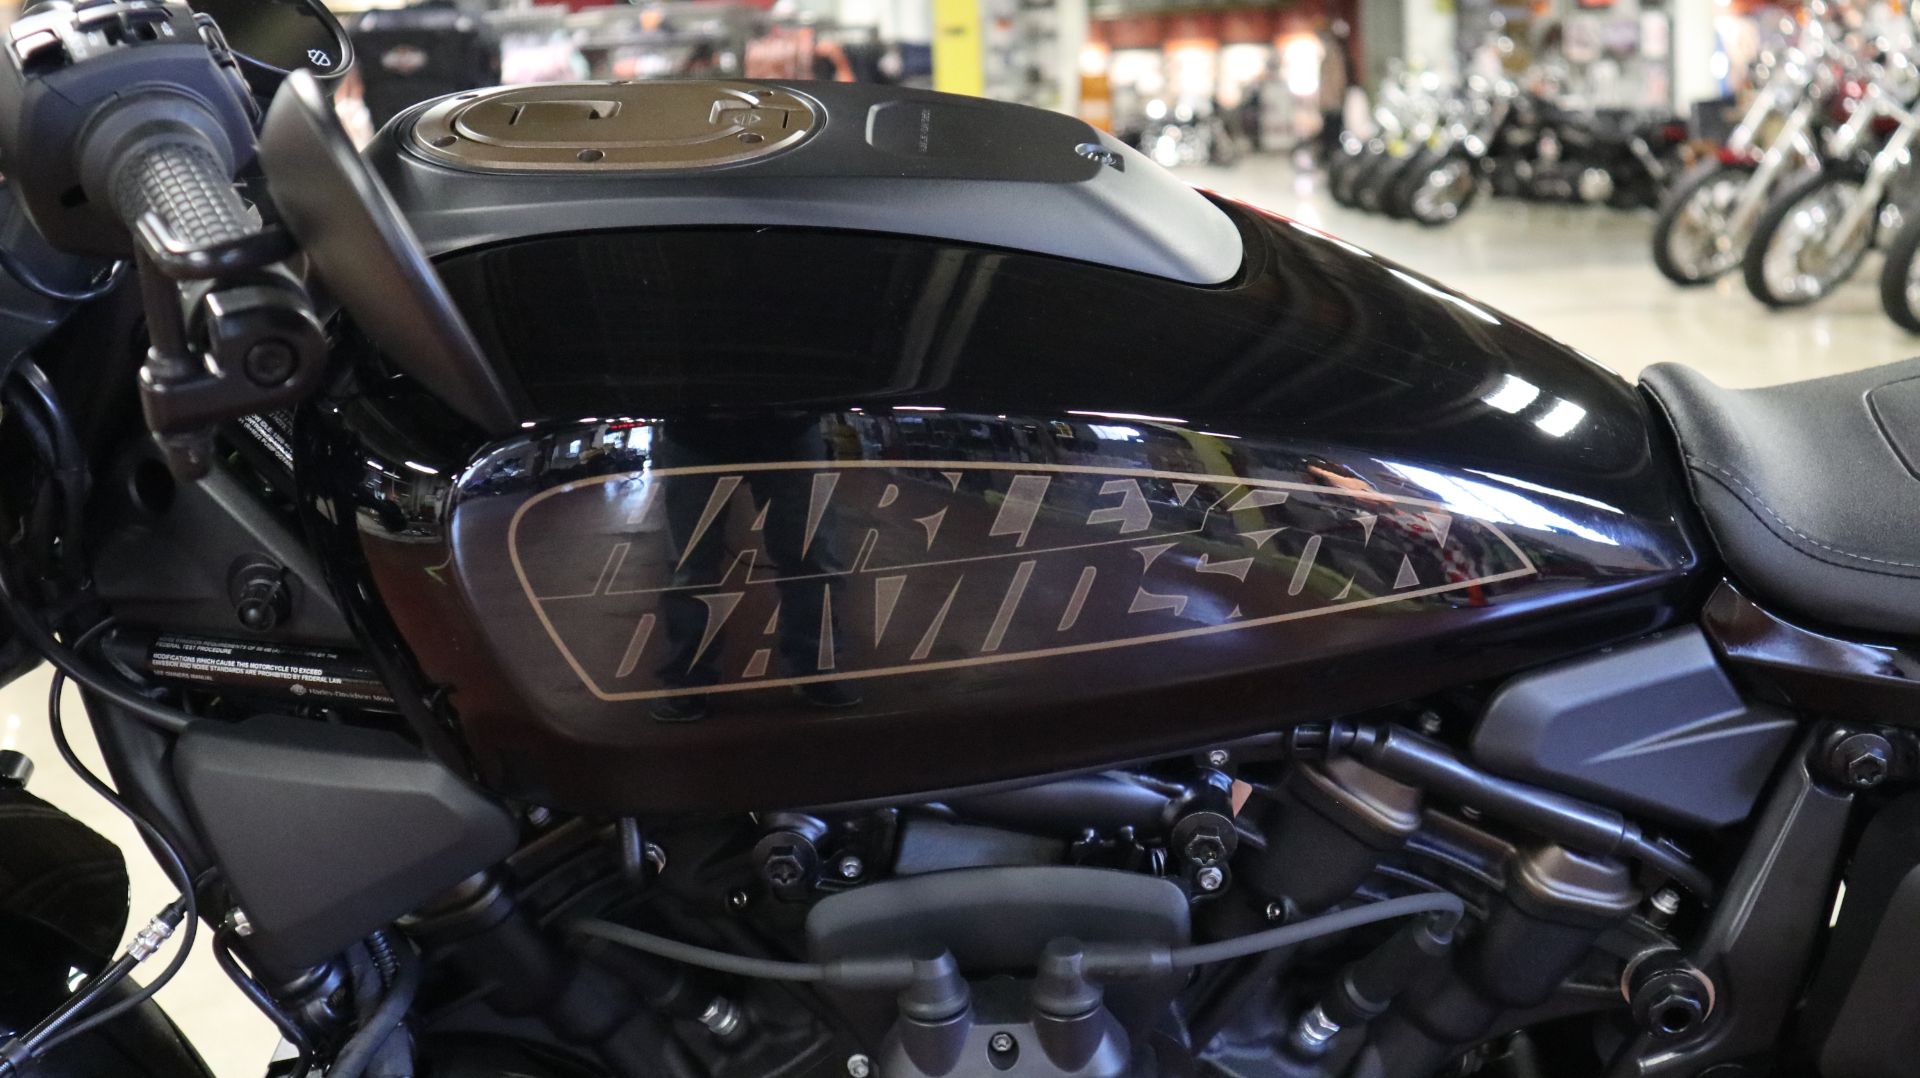 2021 Harley-Davidson Sportster® S in New London, Connecticut - Photo 10